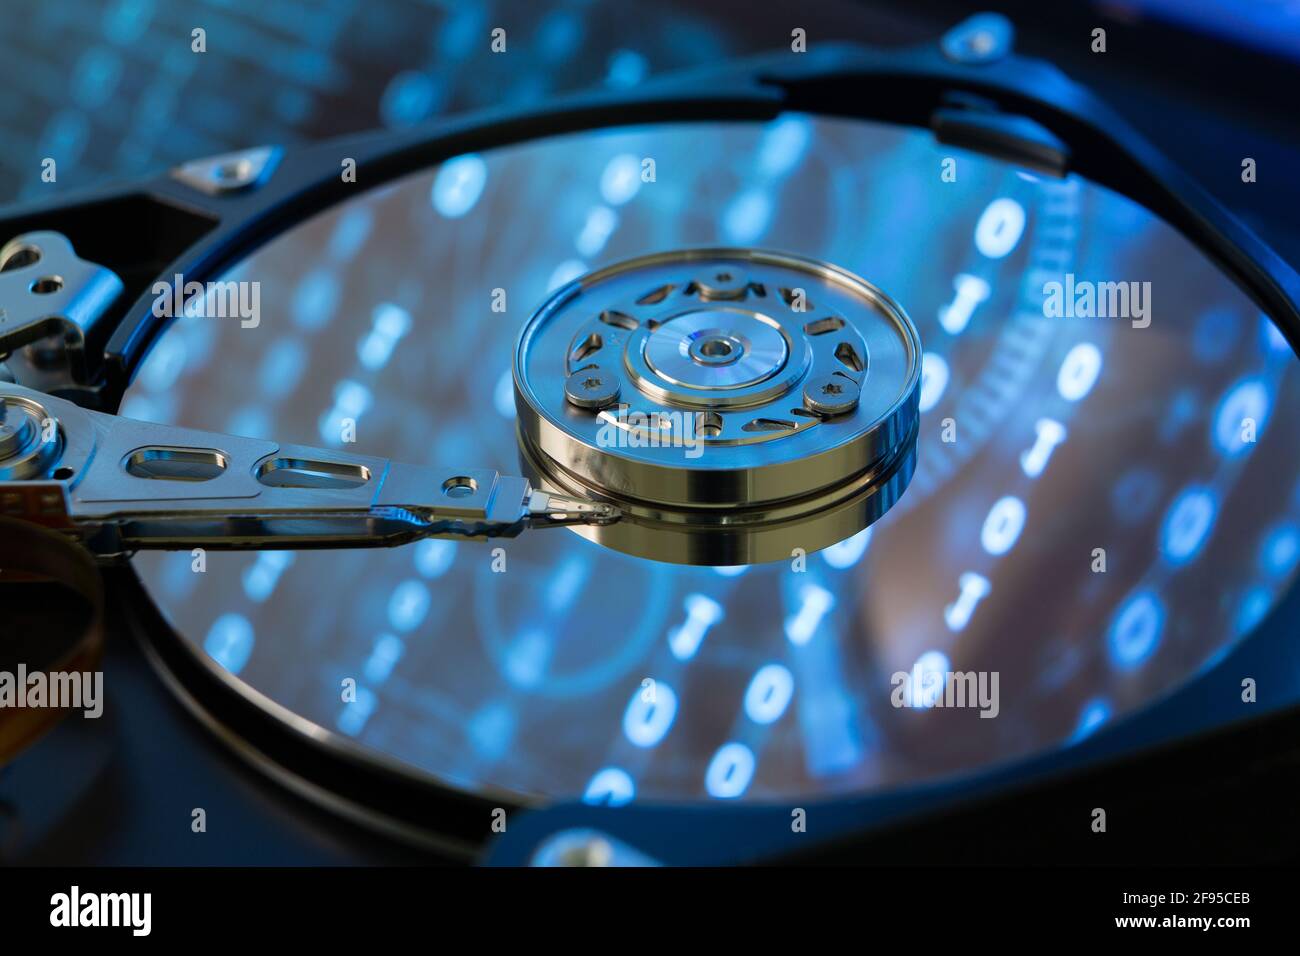 Inside of a hard disk HDD with binary code, zeros and ones, projected onto the surface. Bluish appearance. Stock Photo